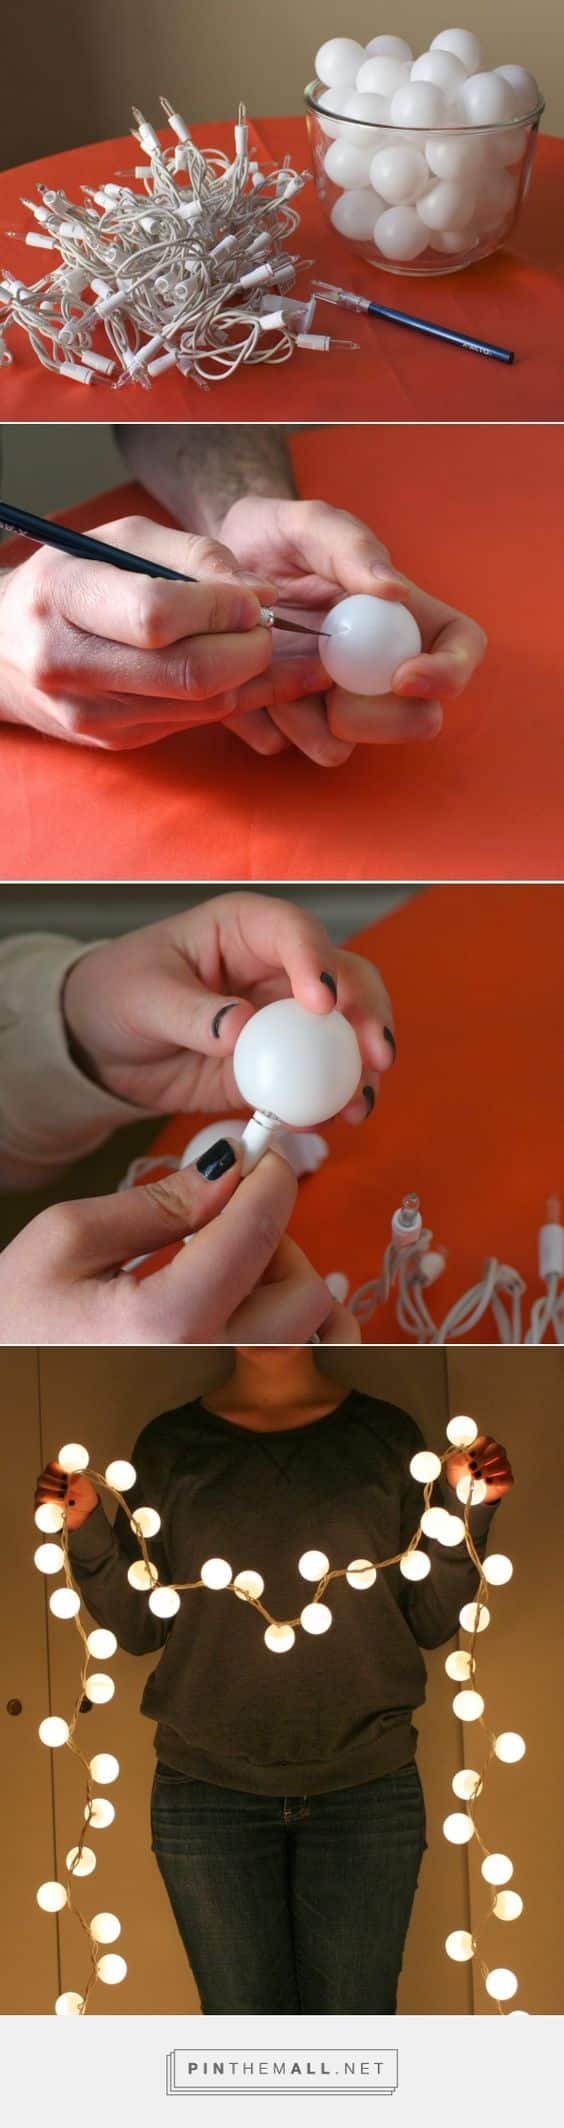 DIY Room Decor for Boys - Ping Pong Ball Lights - Best Creative Bedroom Ideas for Boy Rooms - Wall Art, Lamps, Rugs, Lamps, Beds, Bedding and Furniture You Can Make for Teens, Tweens and Teenagers #diy #homedecor #boys